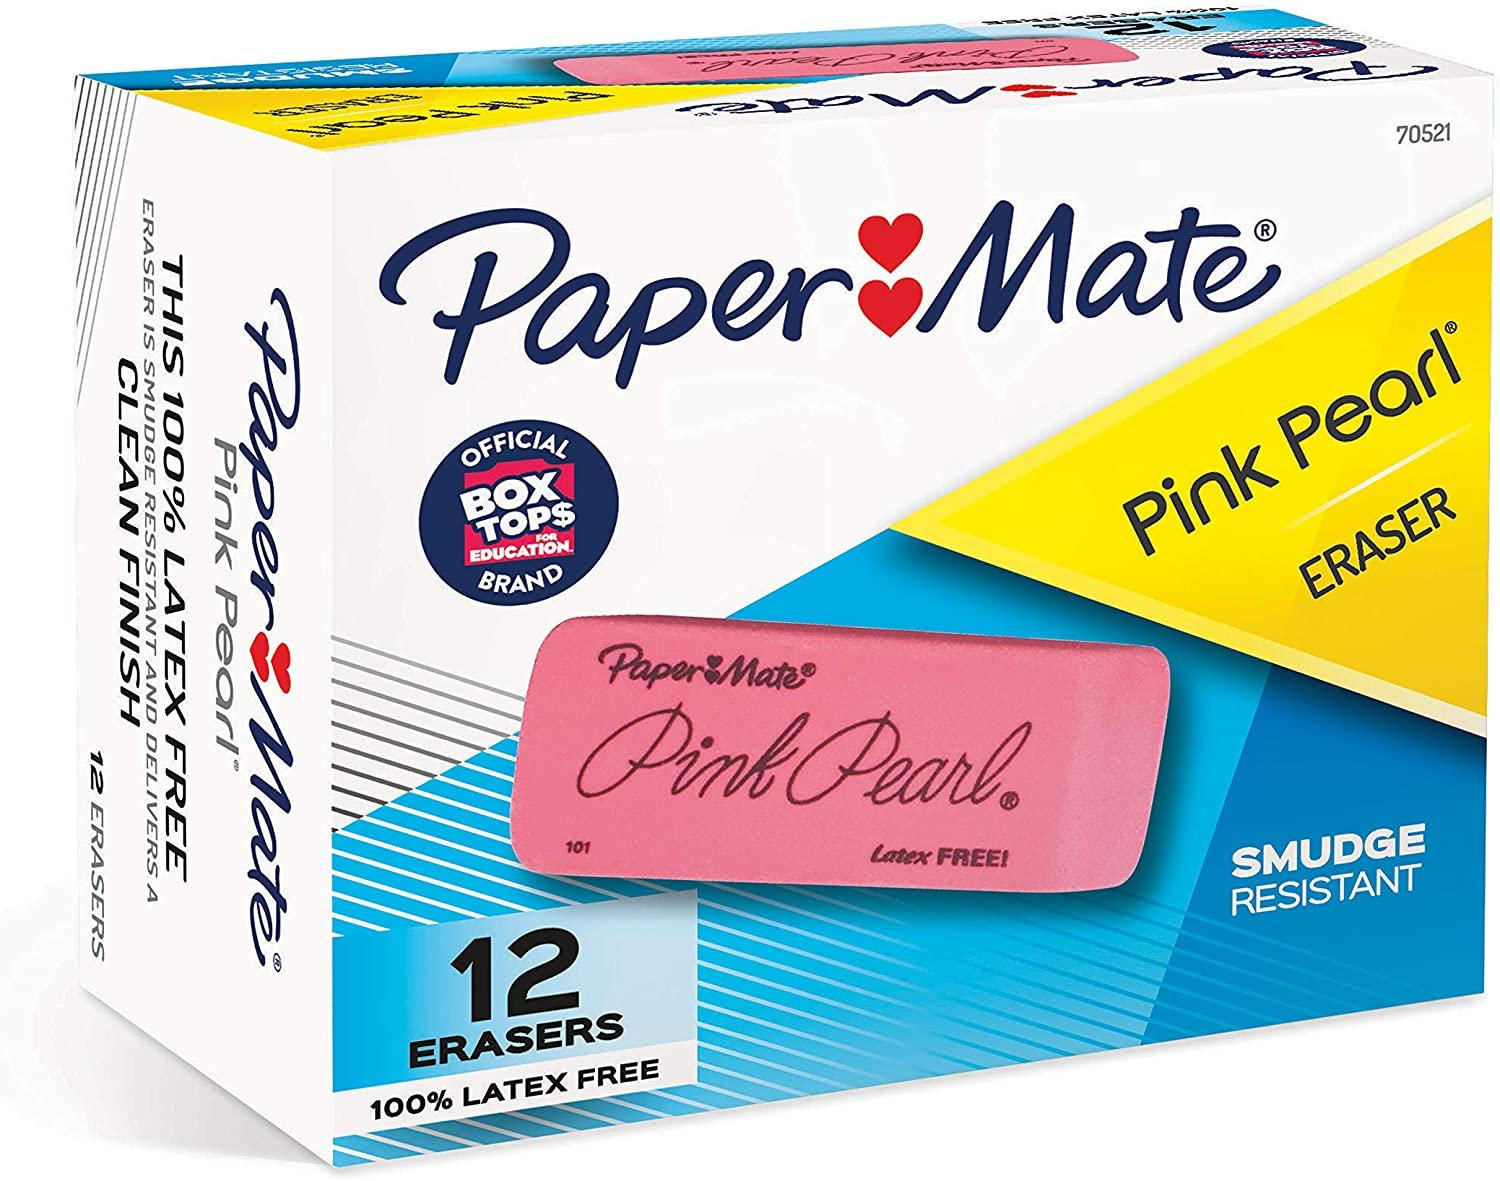 12 Paper Mate Pink Pearl Erasers for $2.86